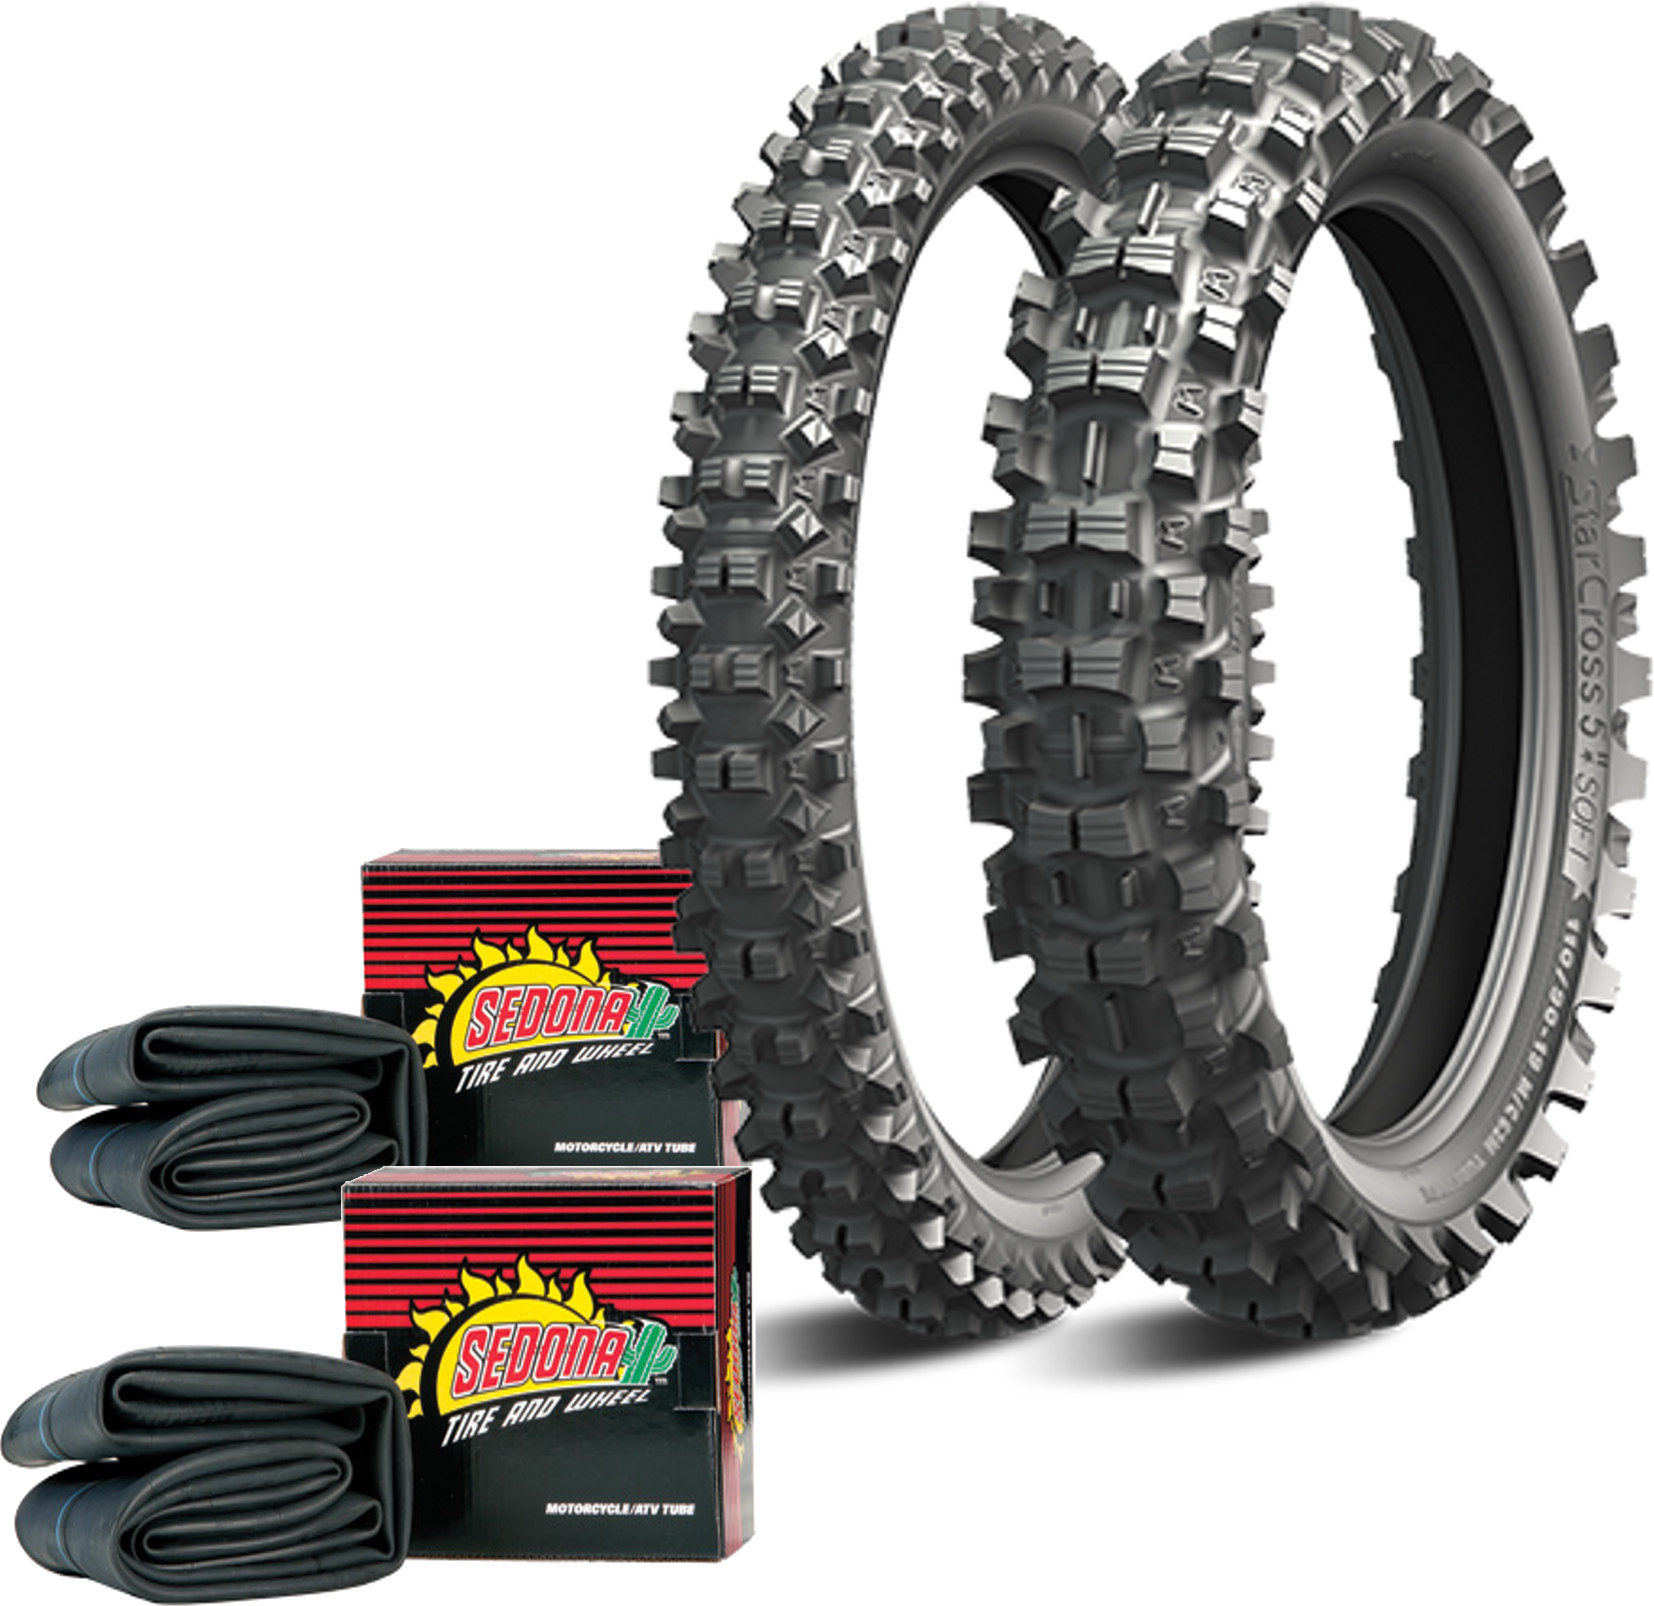 Starcross 5 Med Front+Rear Tires 110/90-19 80/100-21 w/Tubes - Click Image to Close